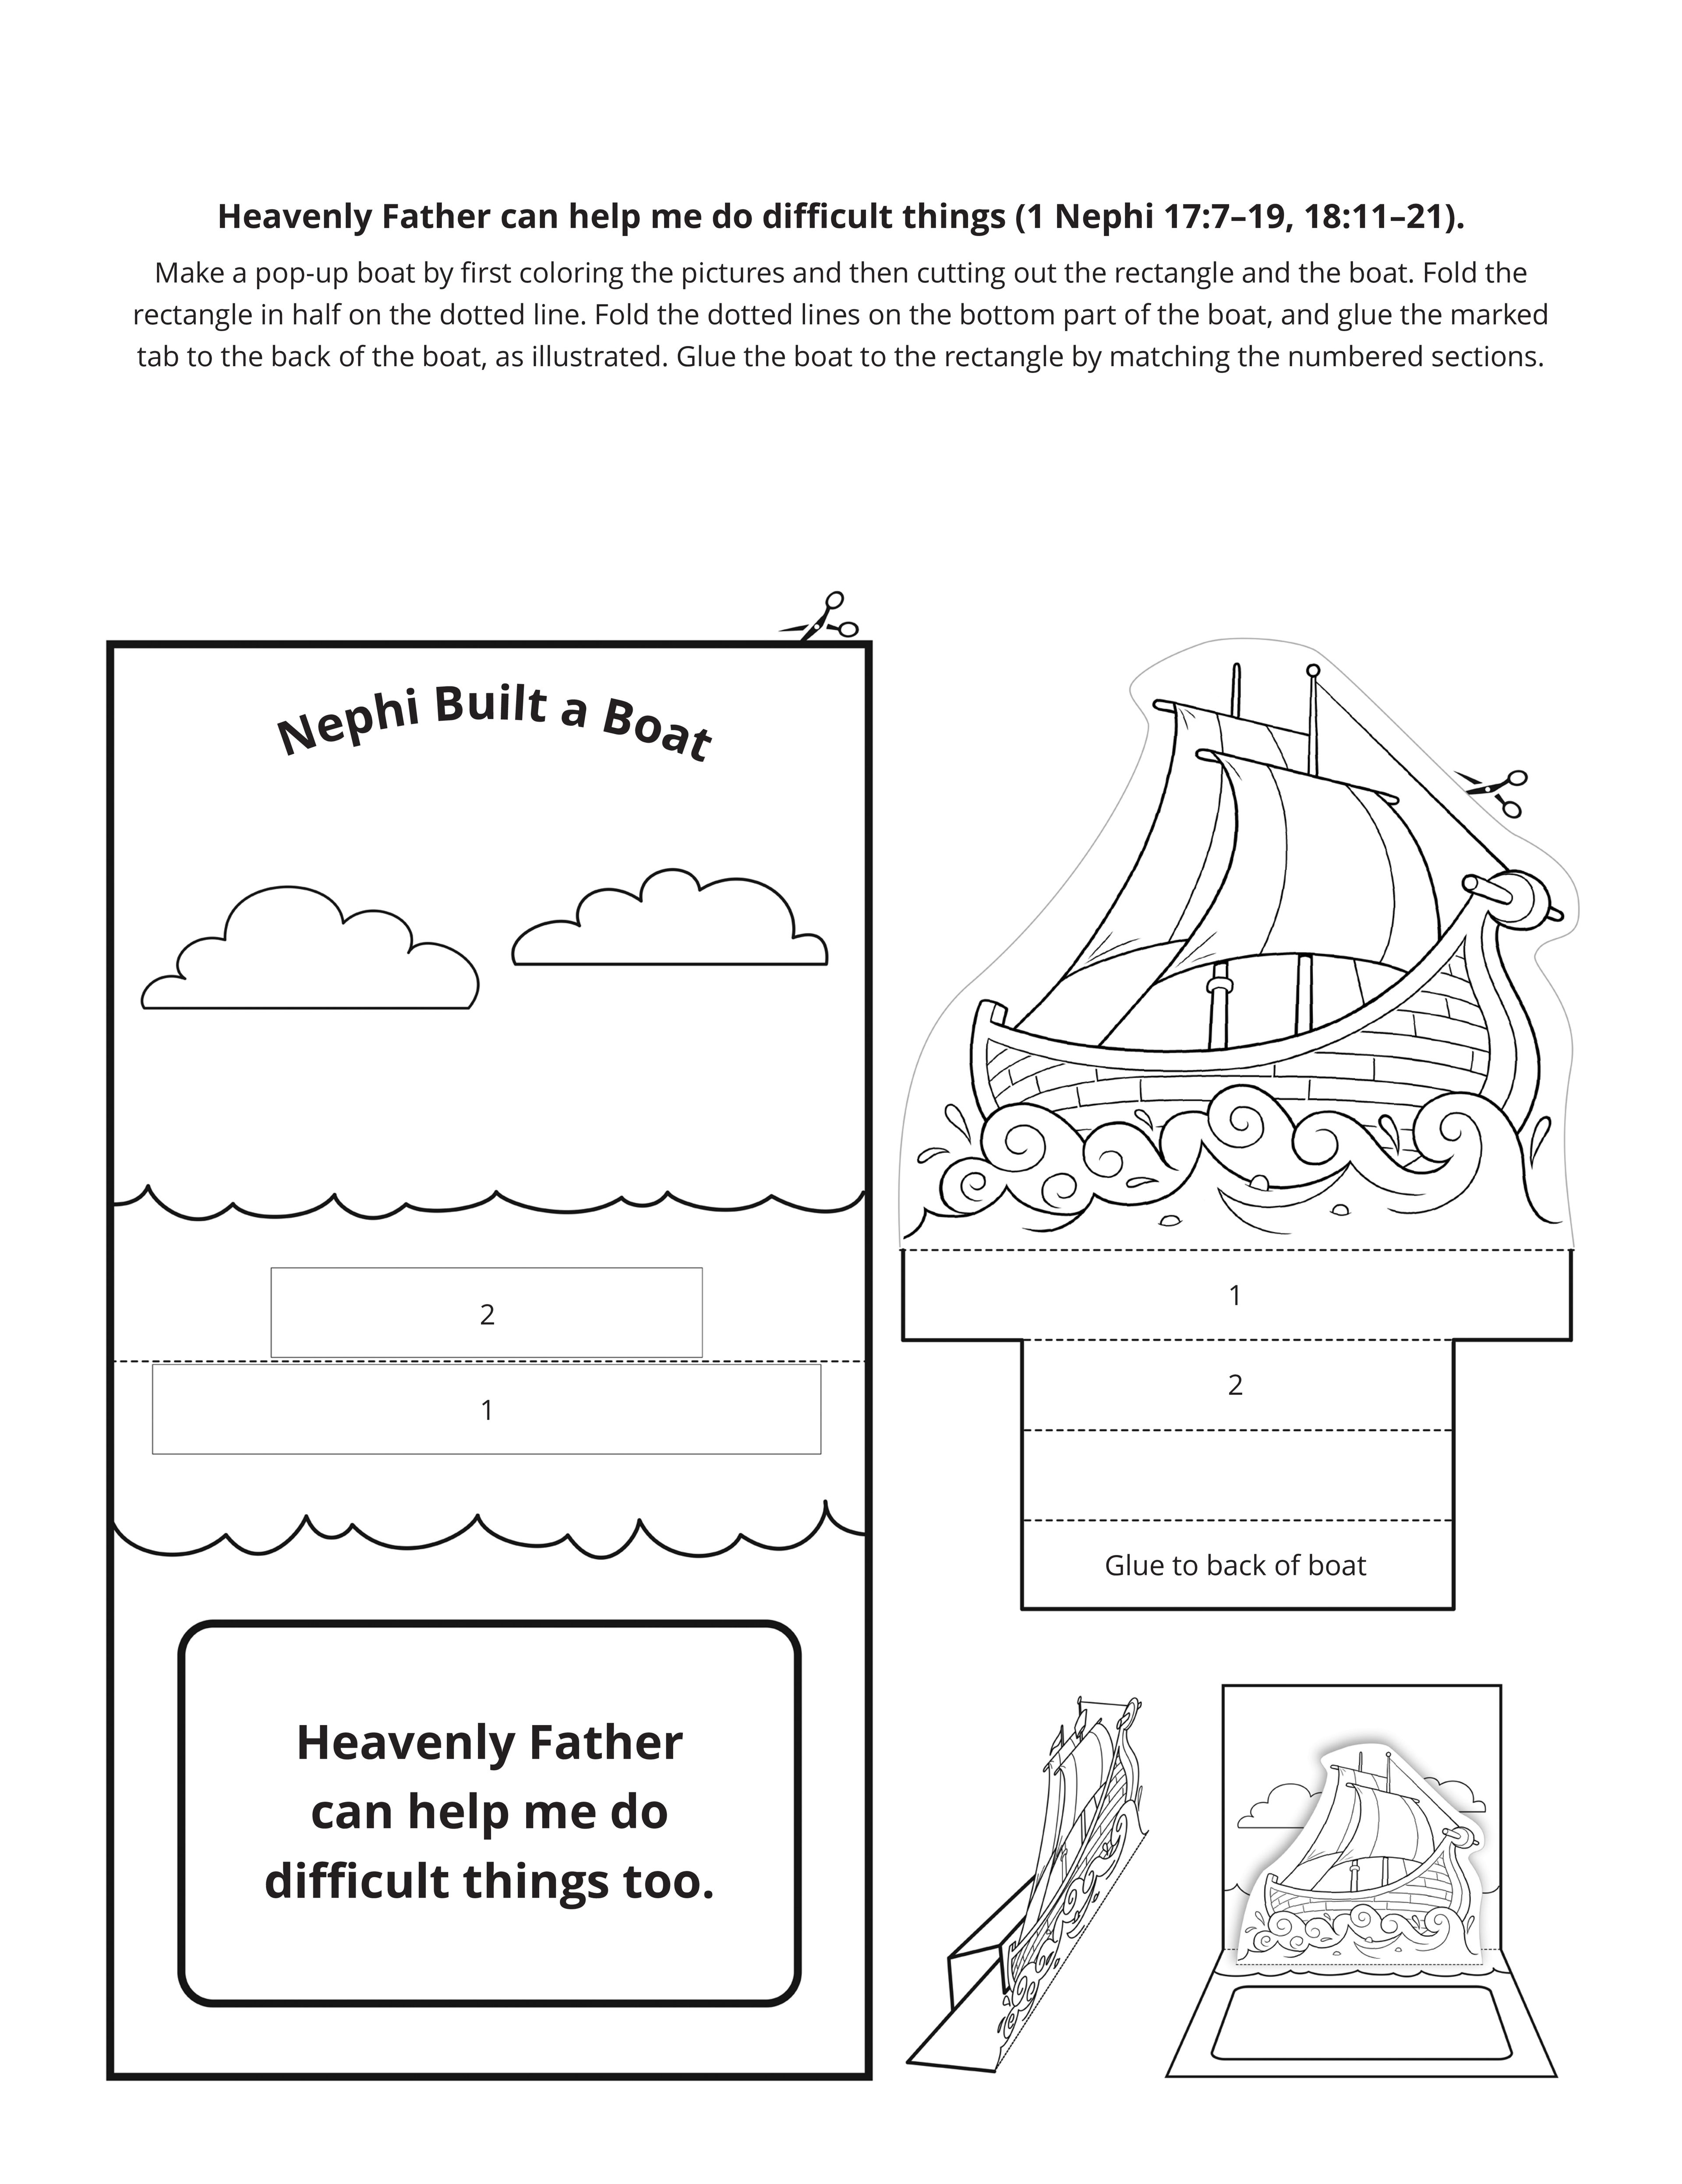 Line art activity page for Nephi Built a Boat, picture of boat, text Heavenly Father can help me do difficult things (1 Nephi 17: 7-19, 18: 11-21)